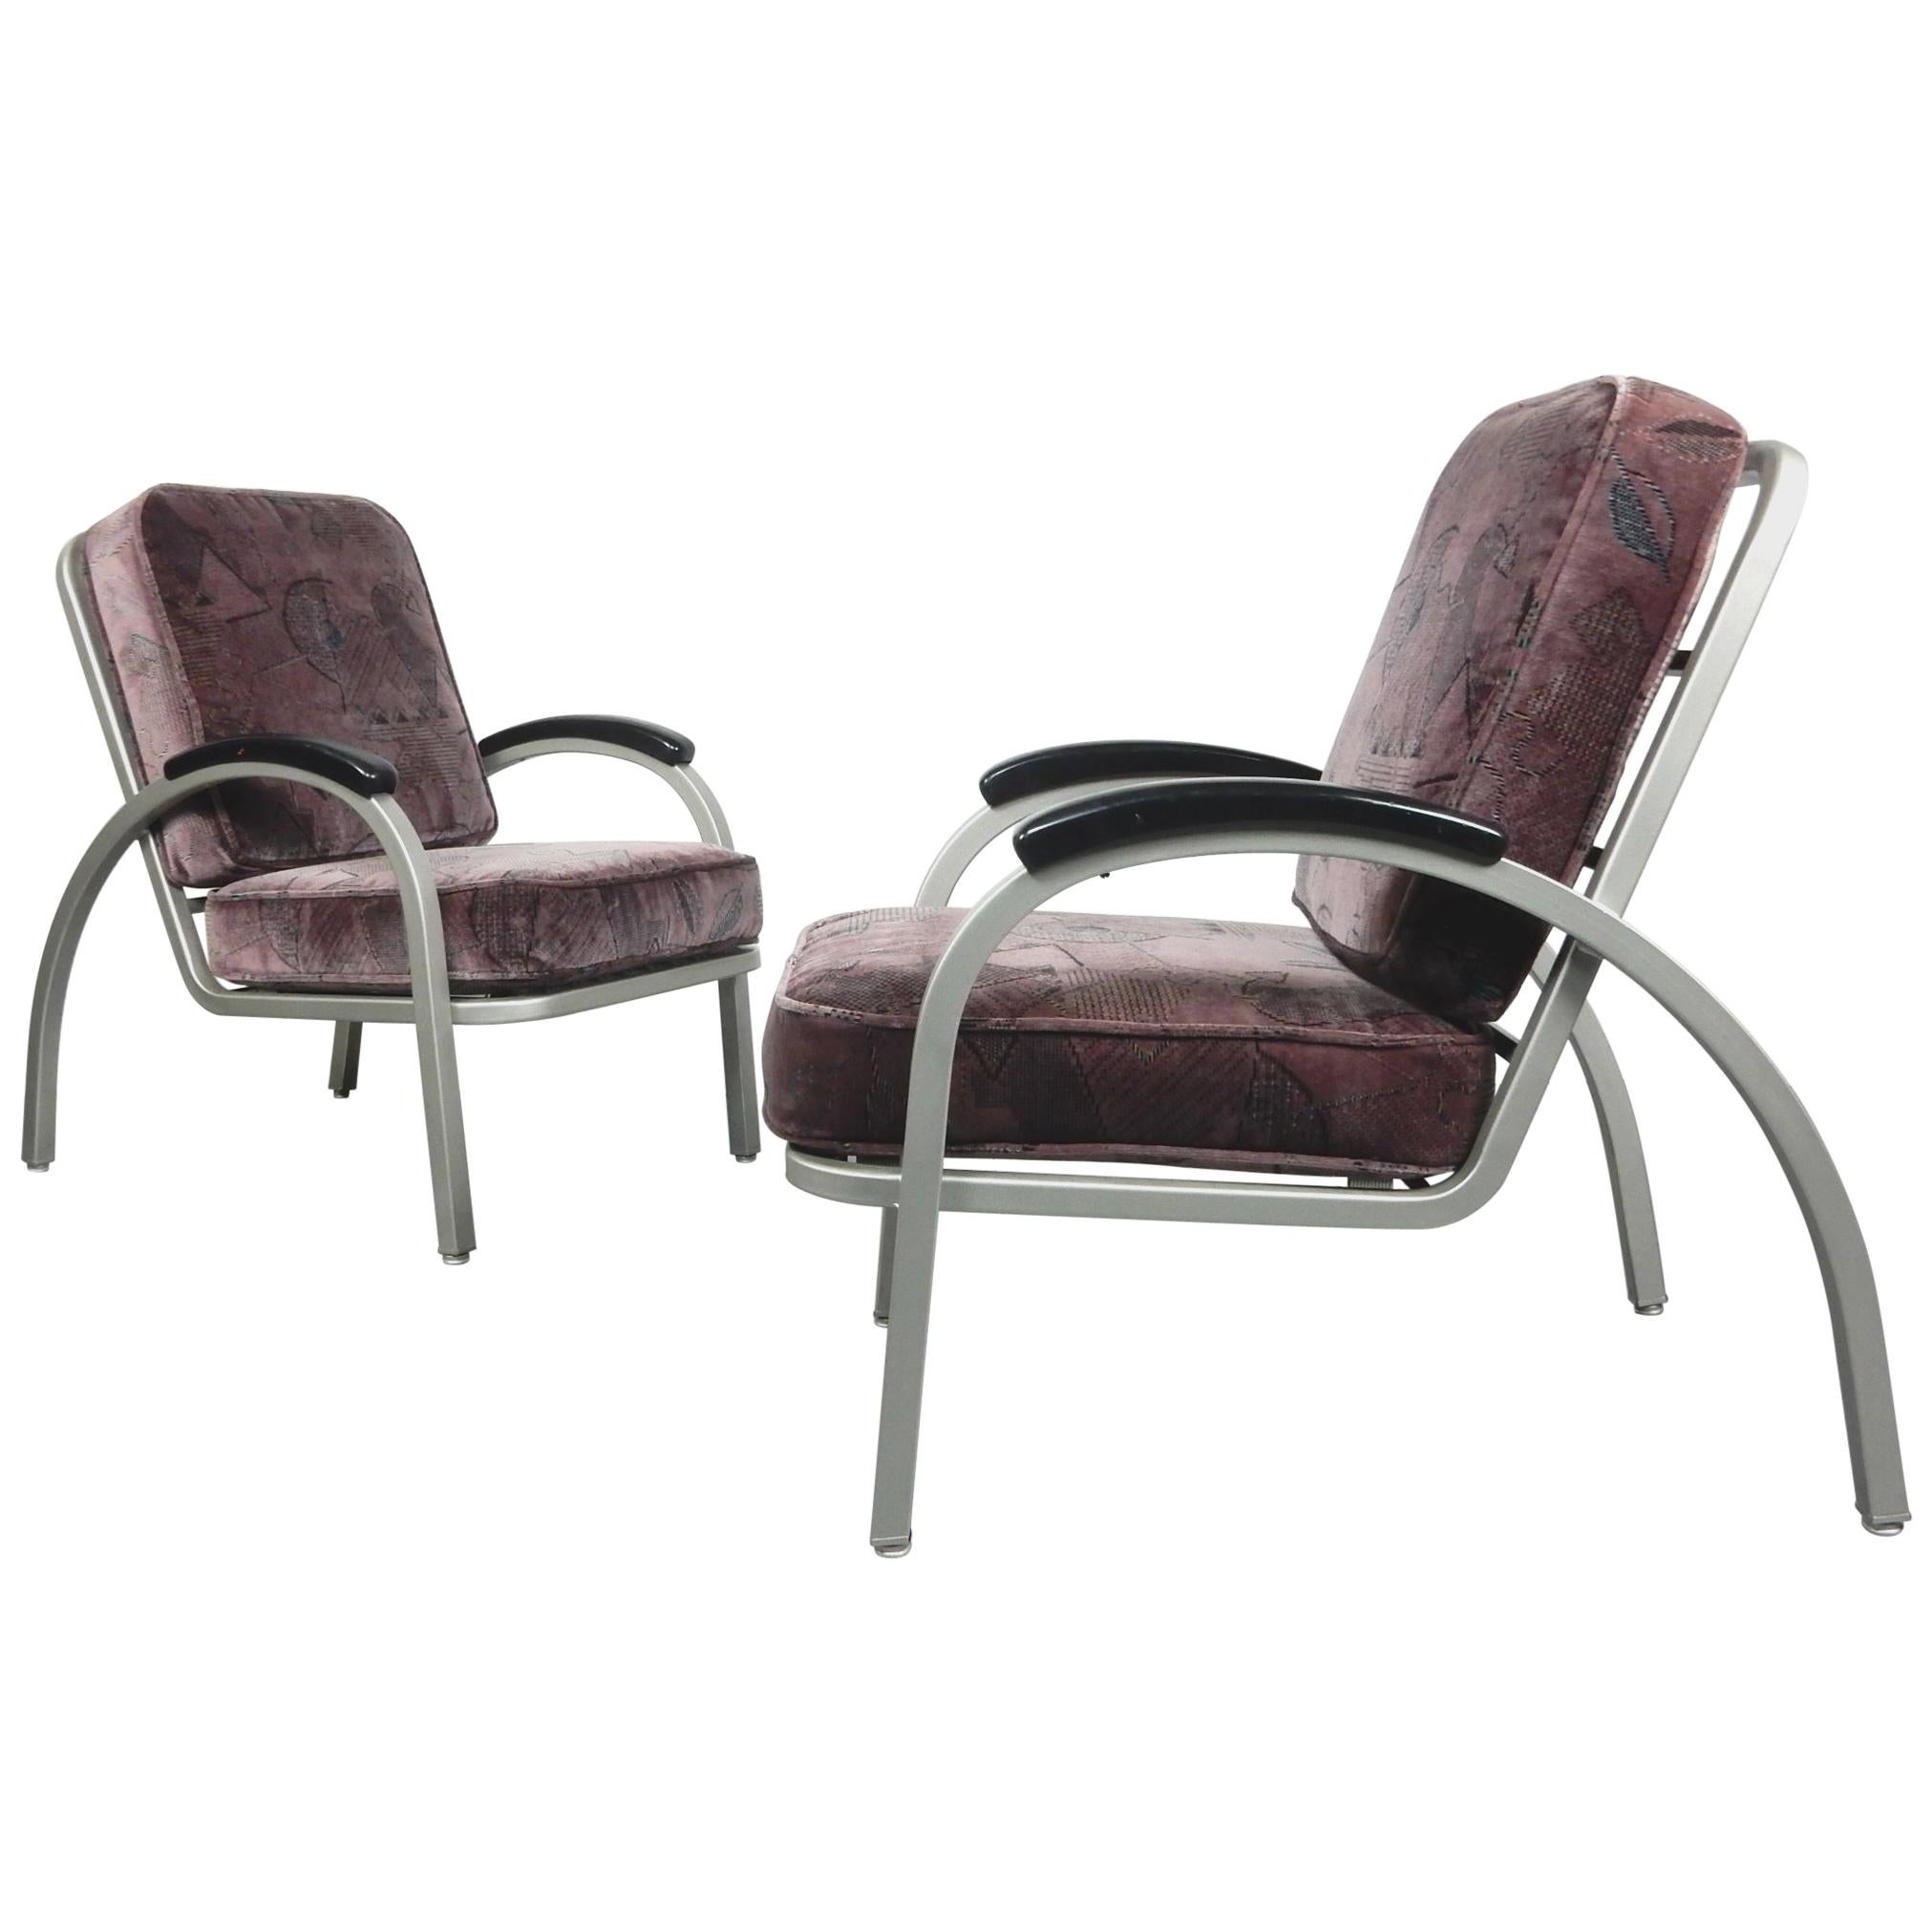 Mid-20th Century Streamline Art Deco Lounge Chairs Designed by Norman Bel Geddes For Sale